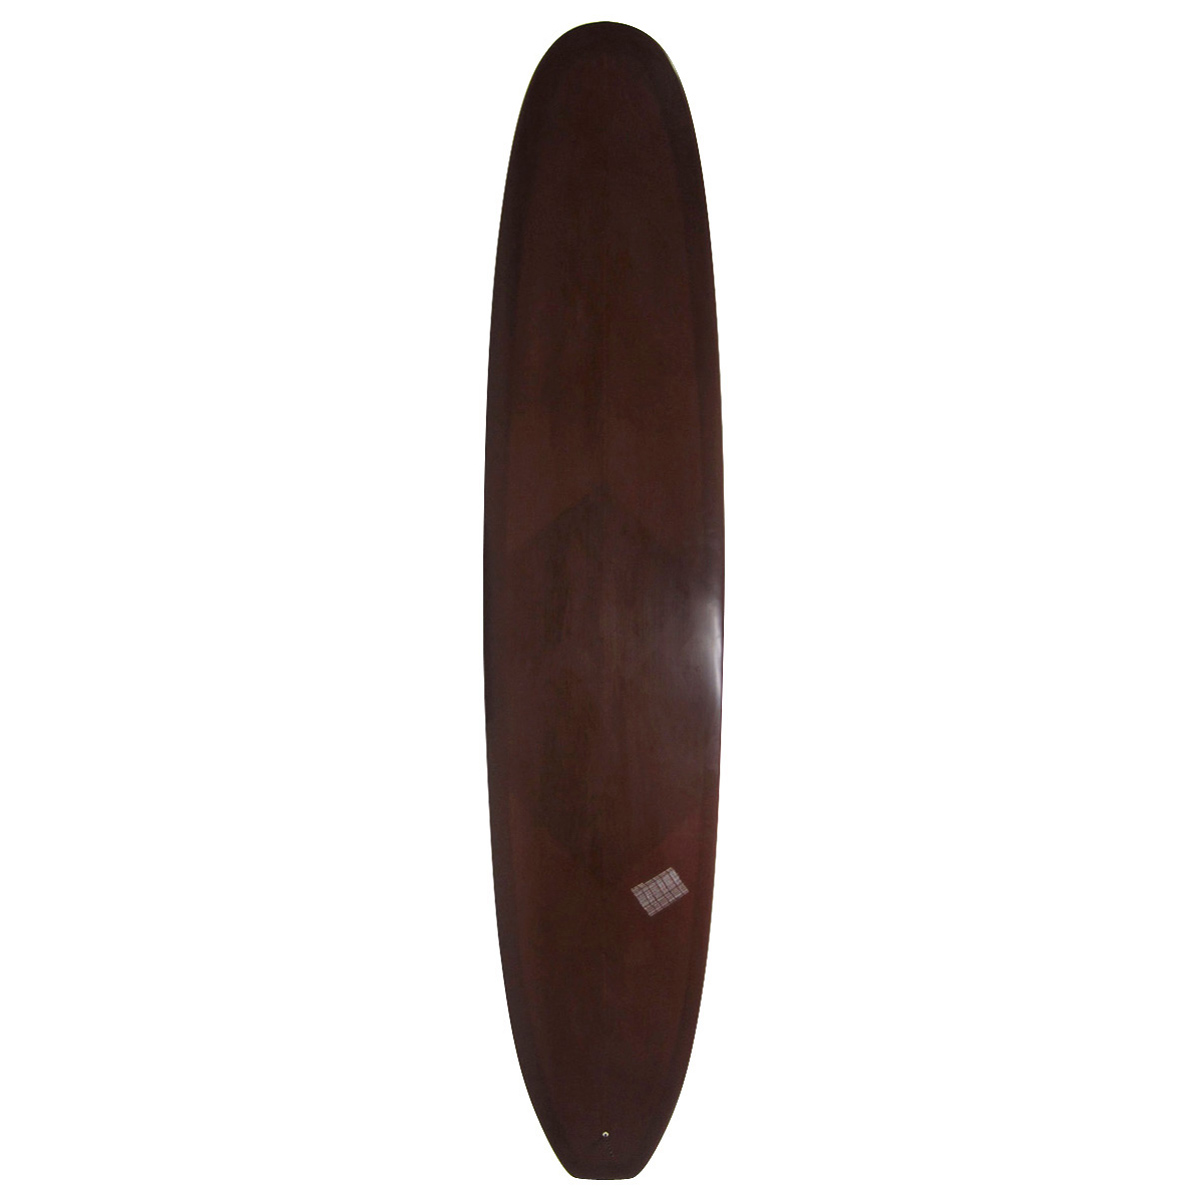 UNHINGED SURFBOARDS / 9`4 PIG Shaped By Dane Peterson